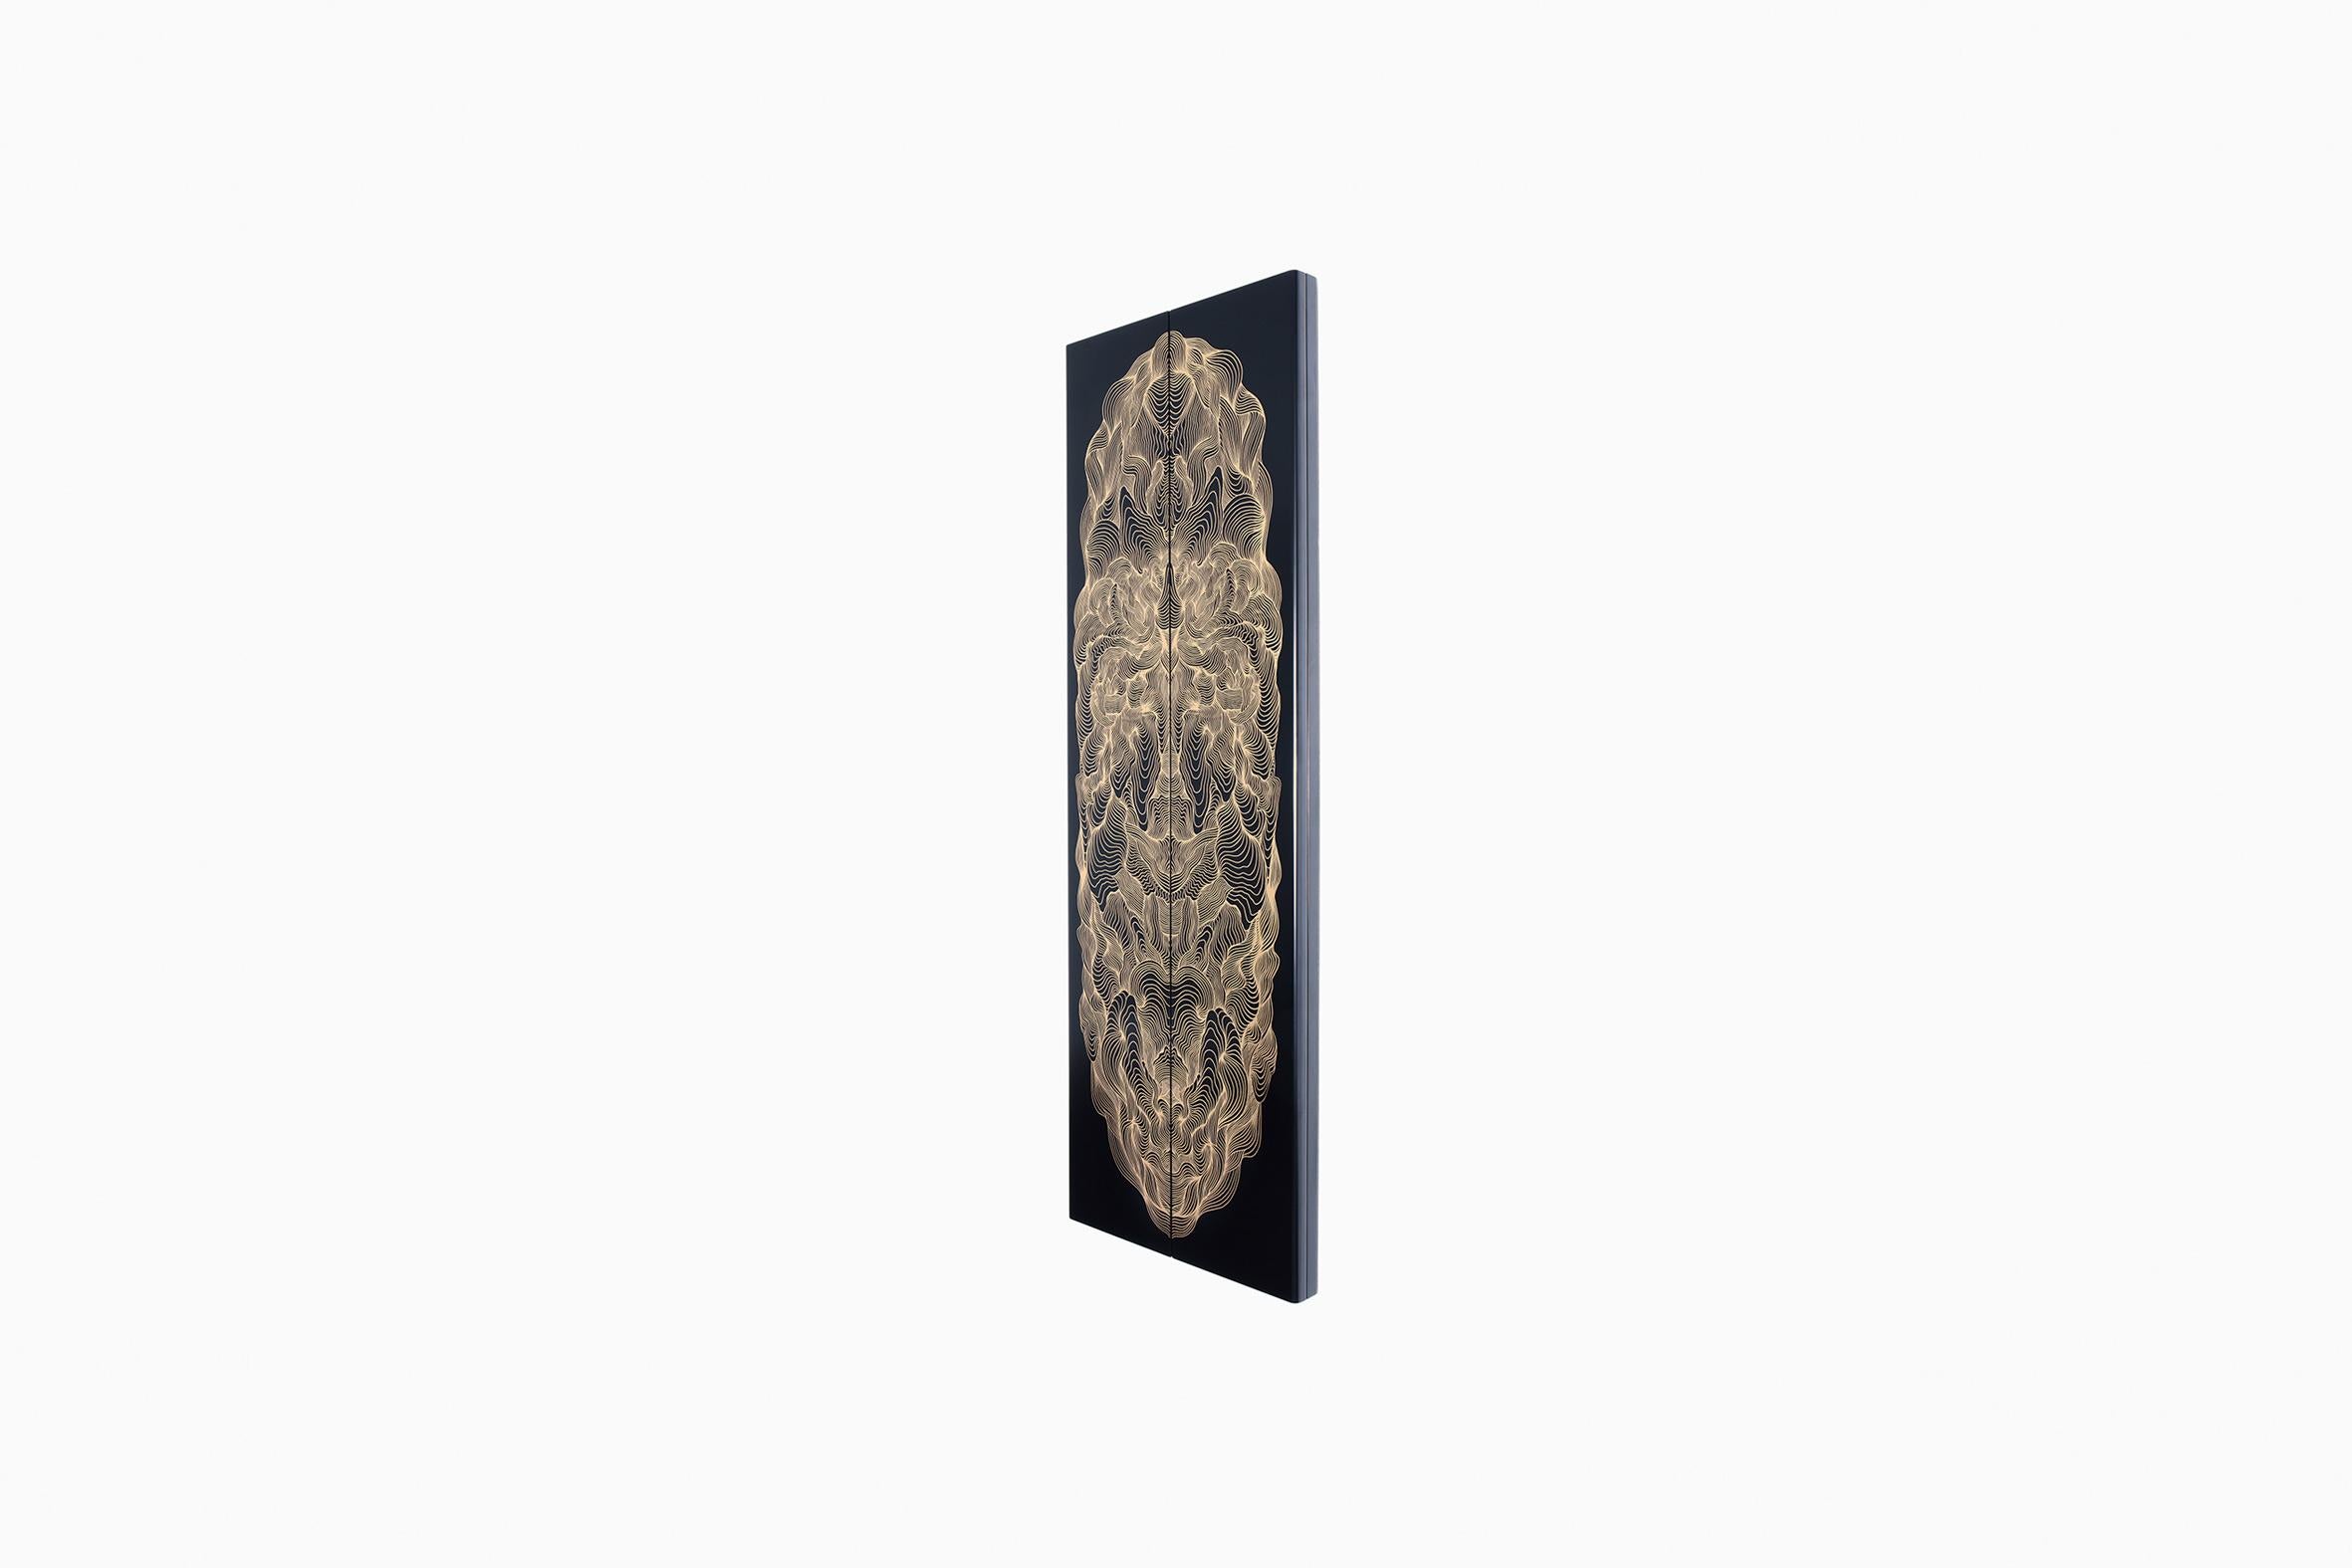 Portal Mirror is Presented by Il lacions

The idea was to commission Joan Tarragó to illustrate the doors of a triptych mirror. The Chinoiserie then came to mind -Chinese lacquer and its filigree drawings with golden motifs-, which he transformed